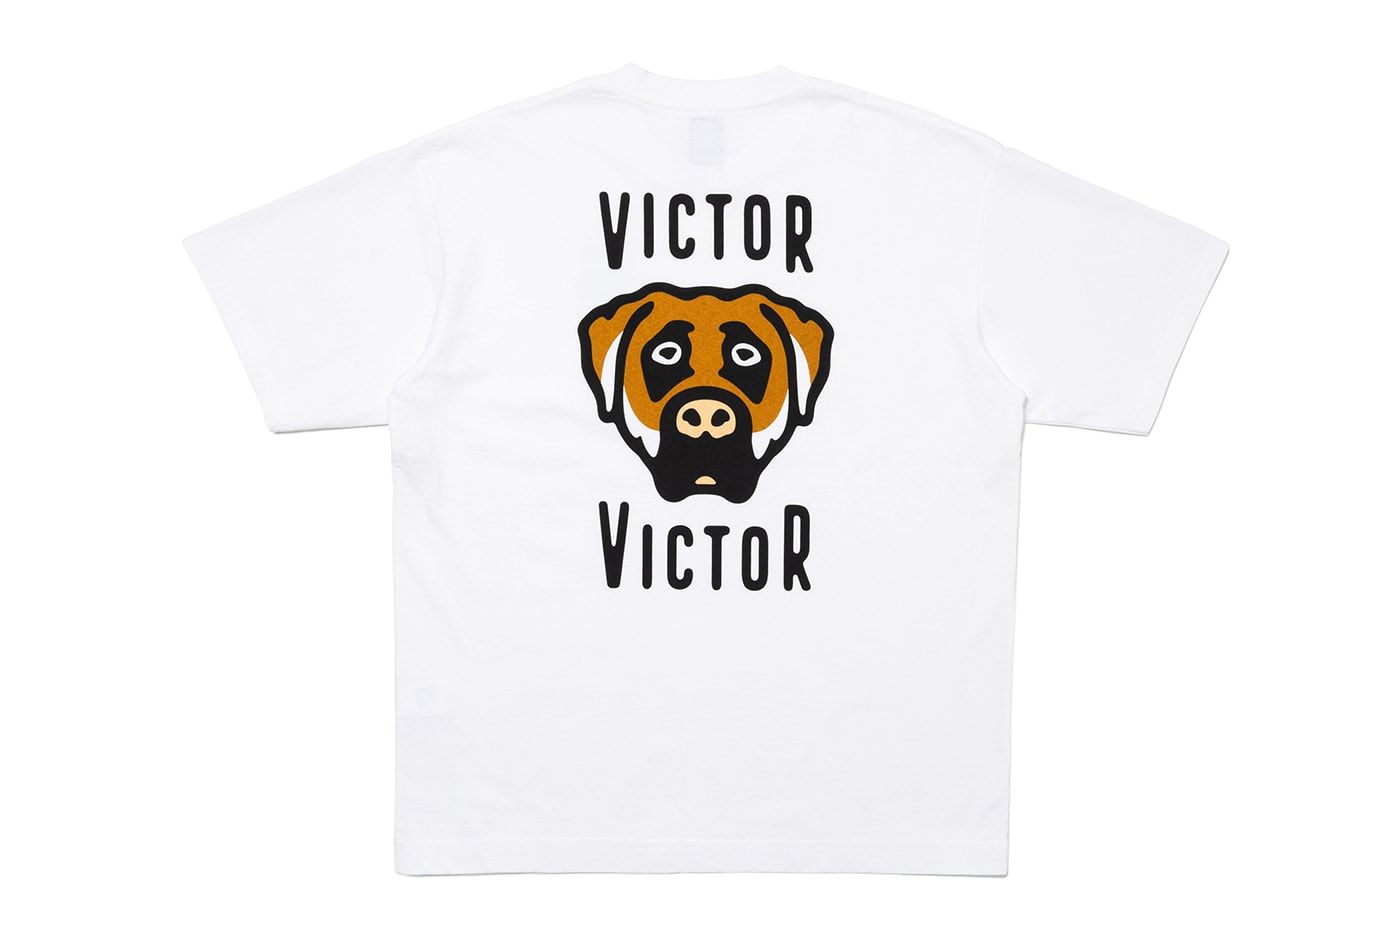 Victor Victor First Capsule Collection Release Info Date Buy Price 